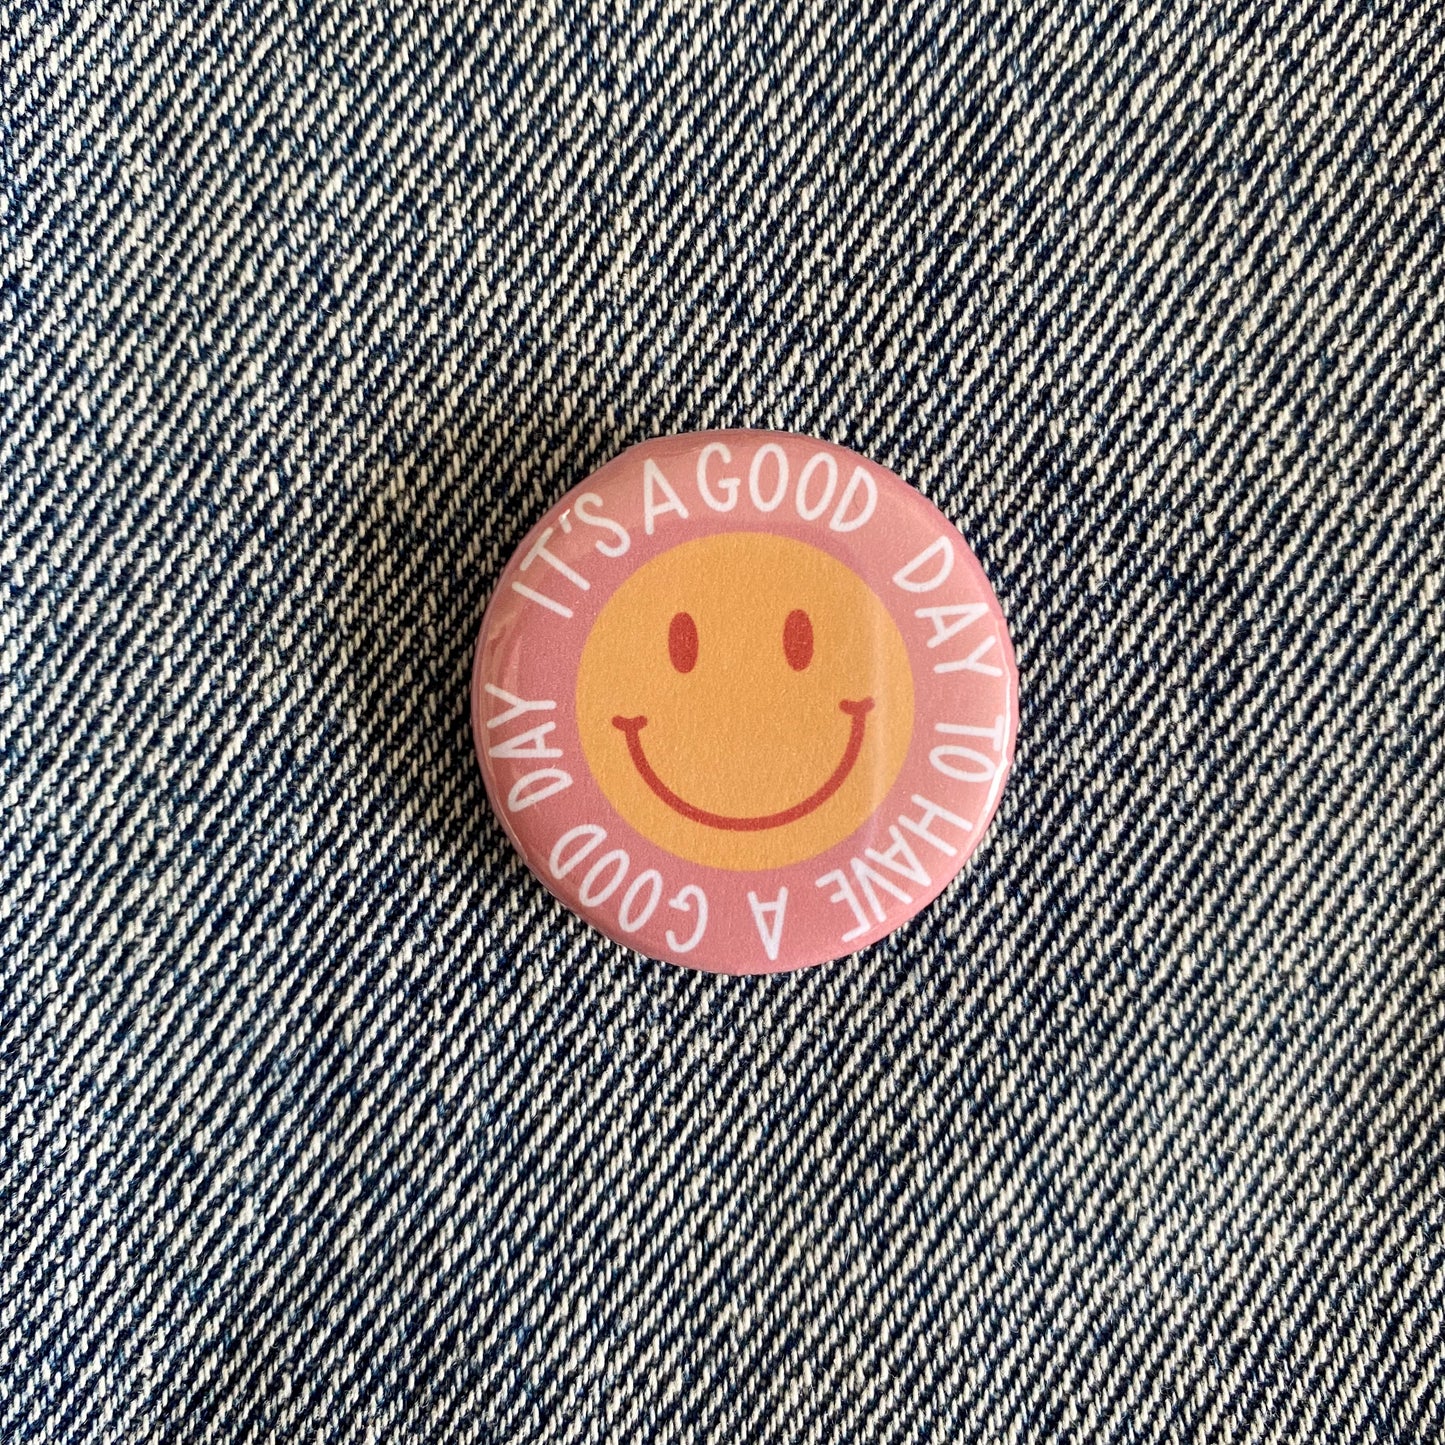 Good Day | Pin Badge Button